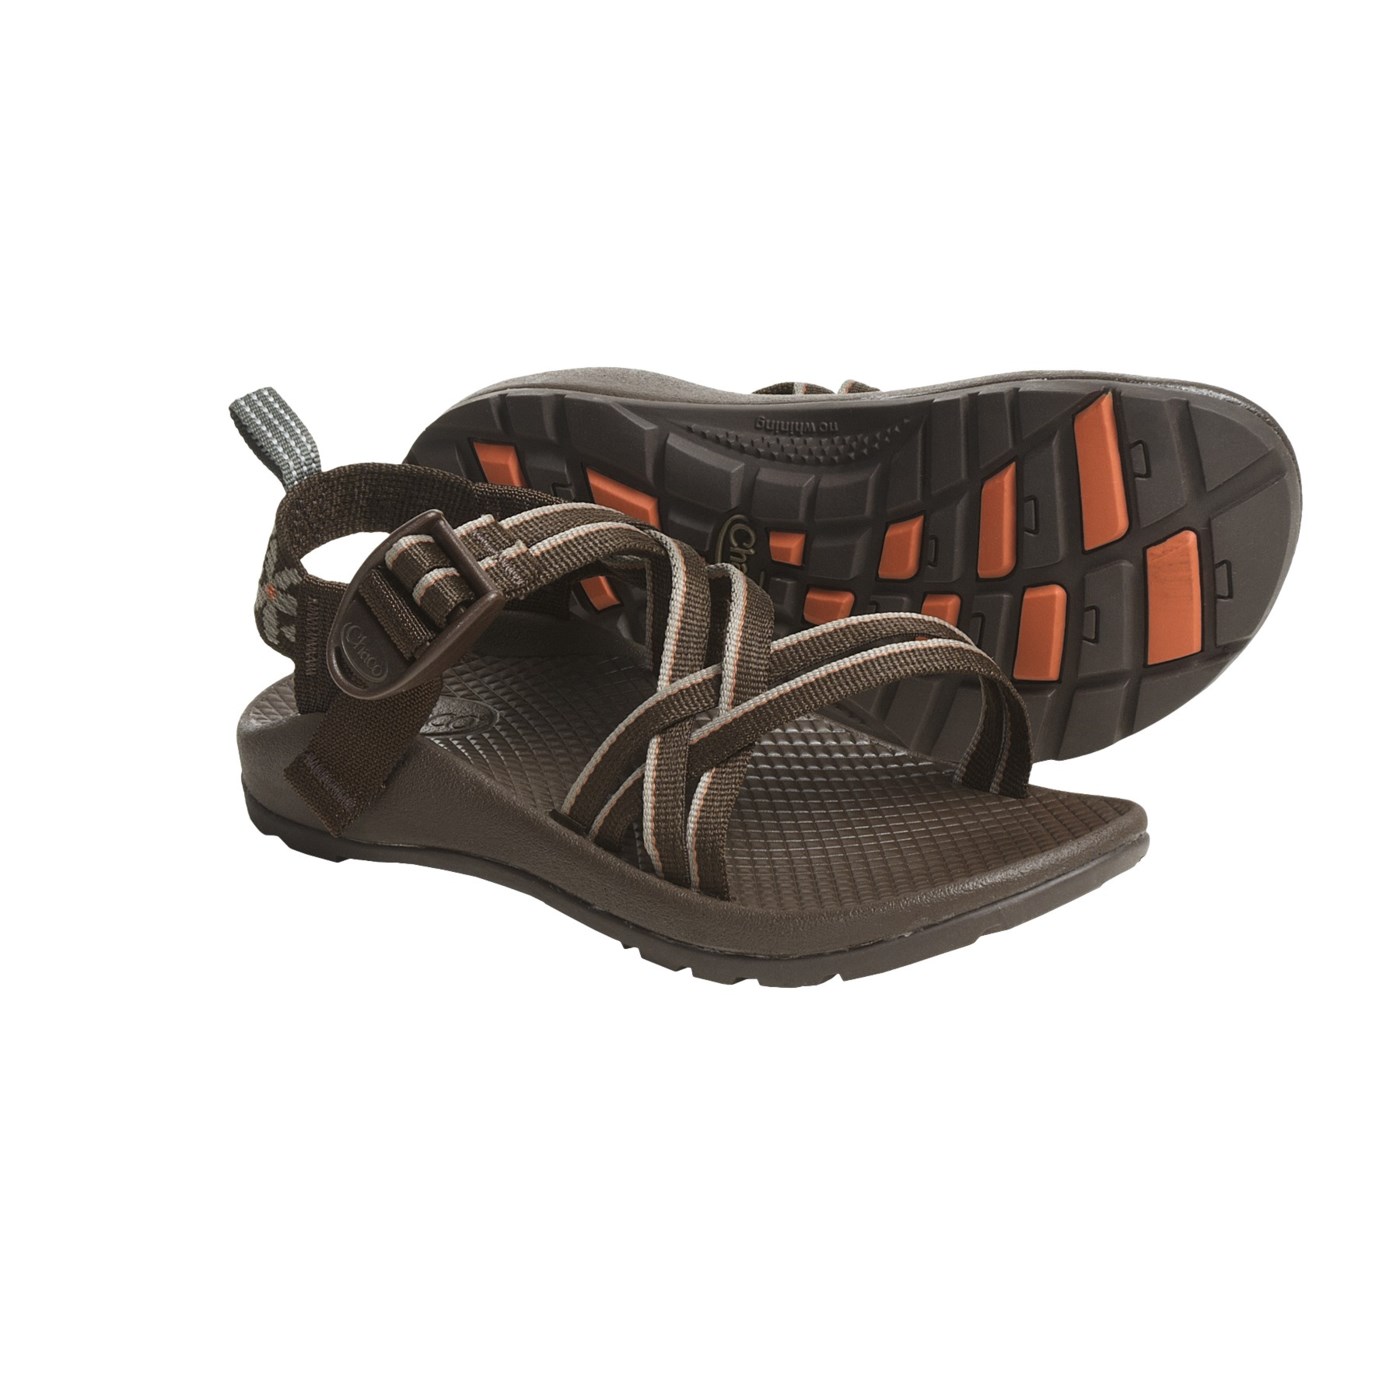 Chaco ZX1 Sandals (For Girls) Save 31%